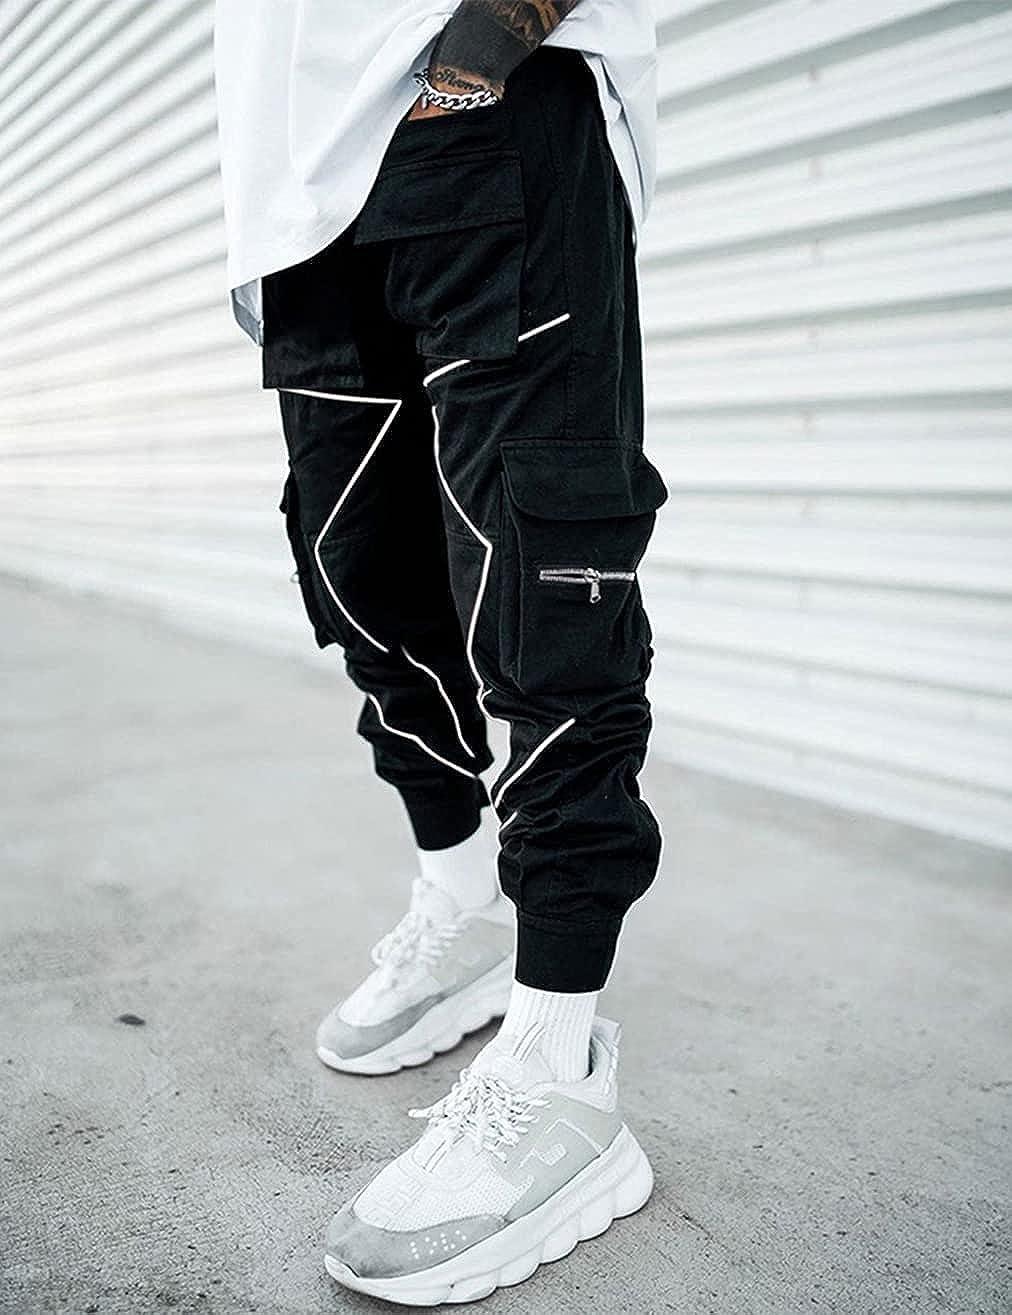 Mens Casual Pockets Cargo Pants Fashion Black Overalls Hip Hop Joggers  Trousers | eBay